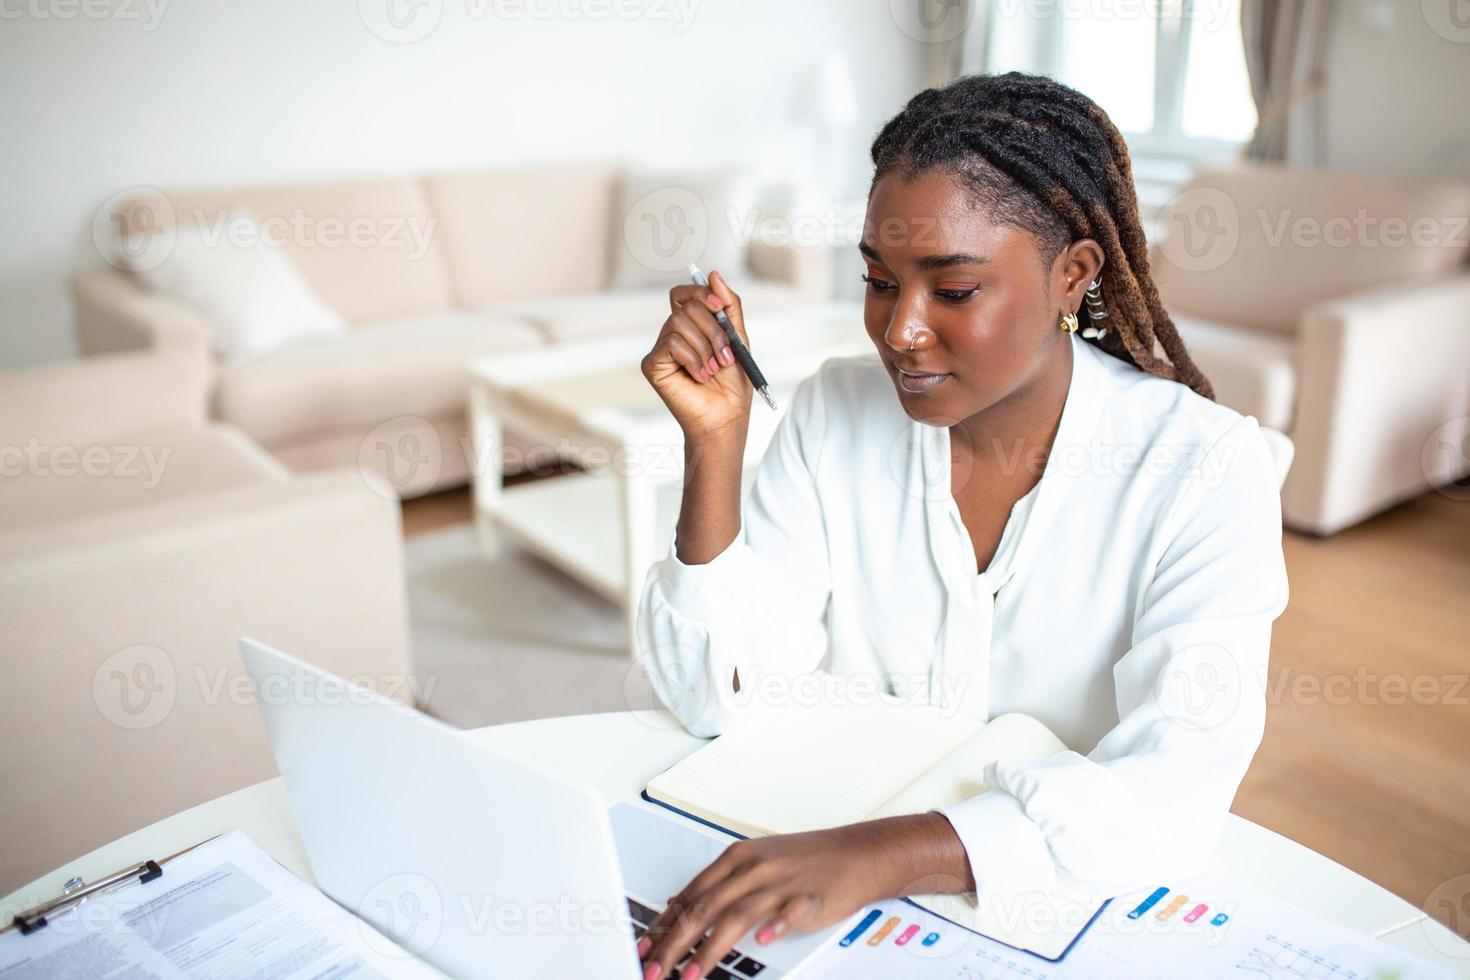 Serious frowning African American ethnicity woman sit at workplace desk looks at laptop screen read e-mail feels concerned. Bored unmotivated tired employee, problems difficulties with app photo